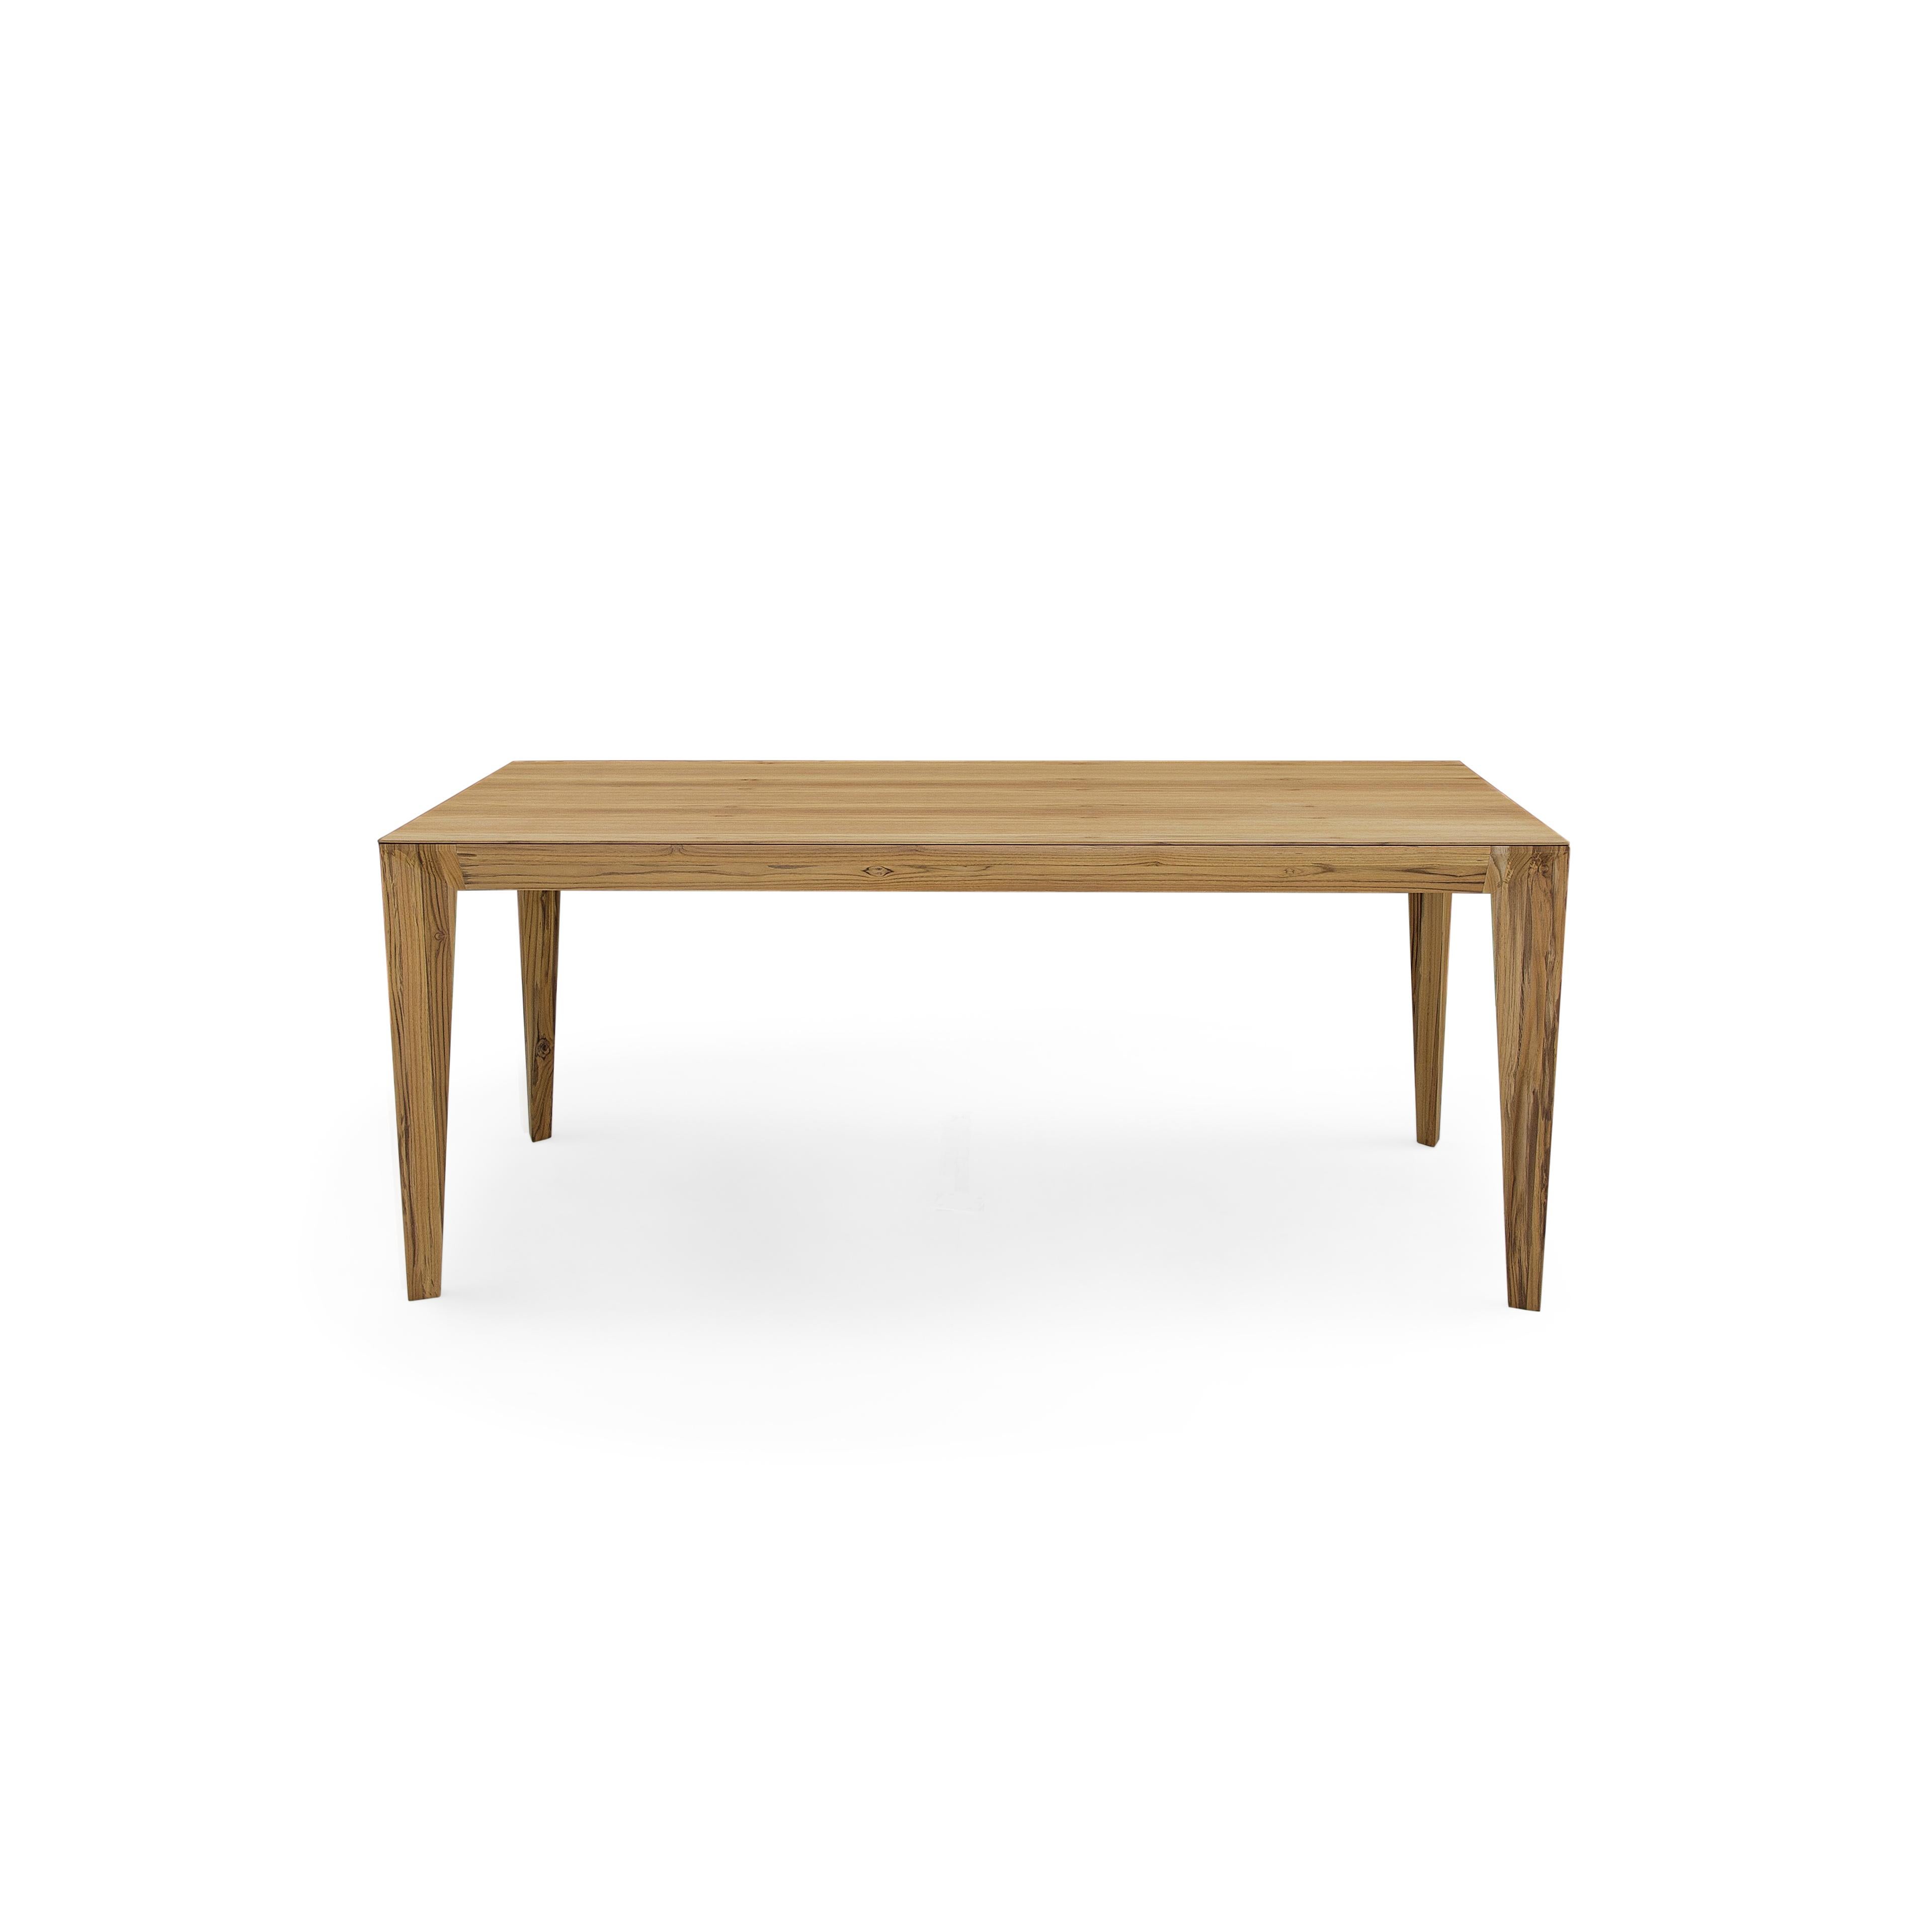 Luce Rectangular Dining Table with a Teak Wood Finish Veneered Table Top 95'' For Sale 4